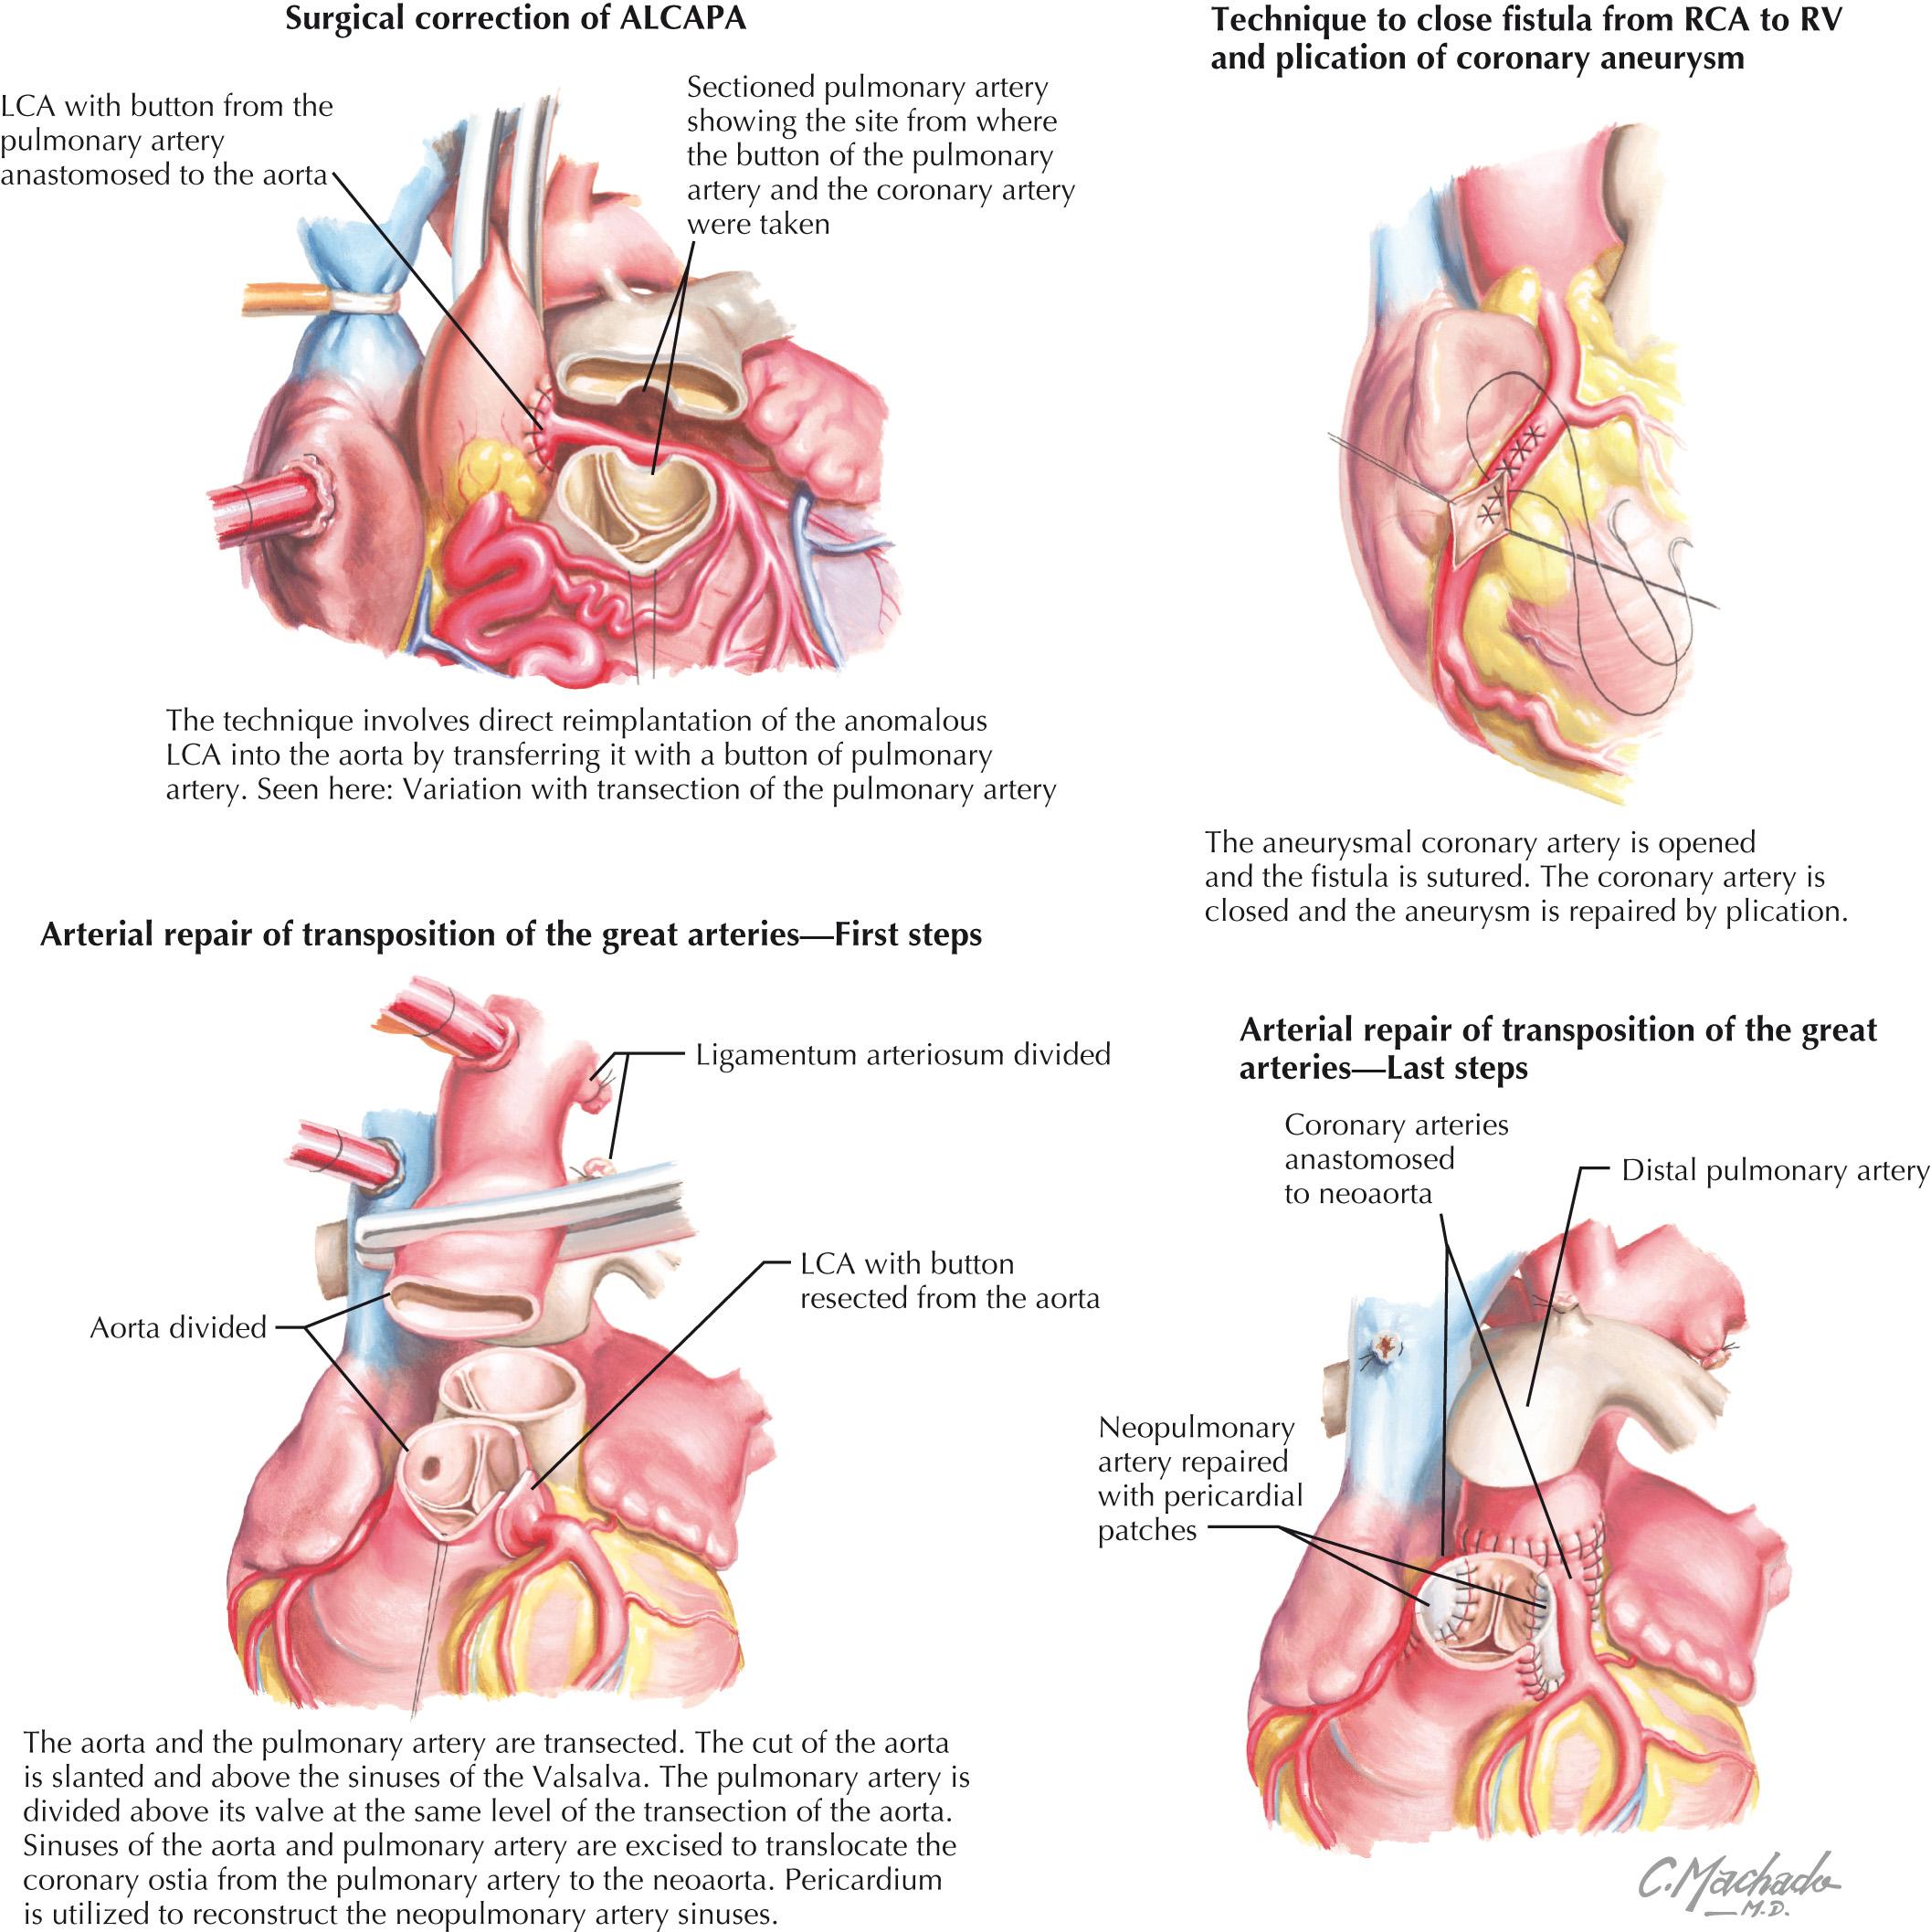 FIG 25.3, Surgical Procedures for Correction of Congenital Coronary Artery Anomalies.